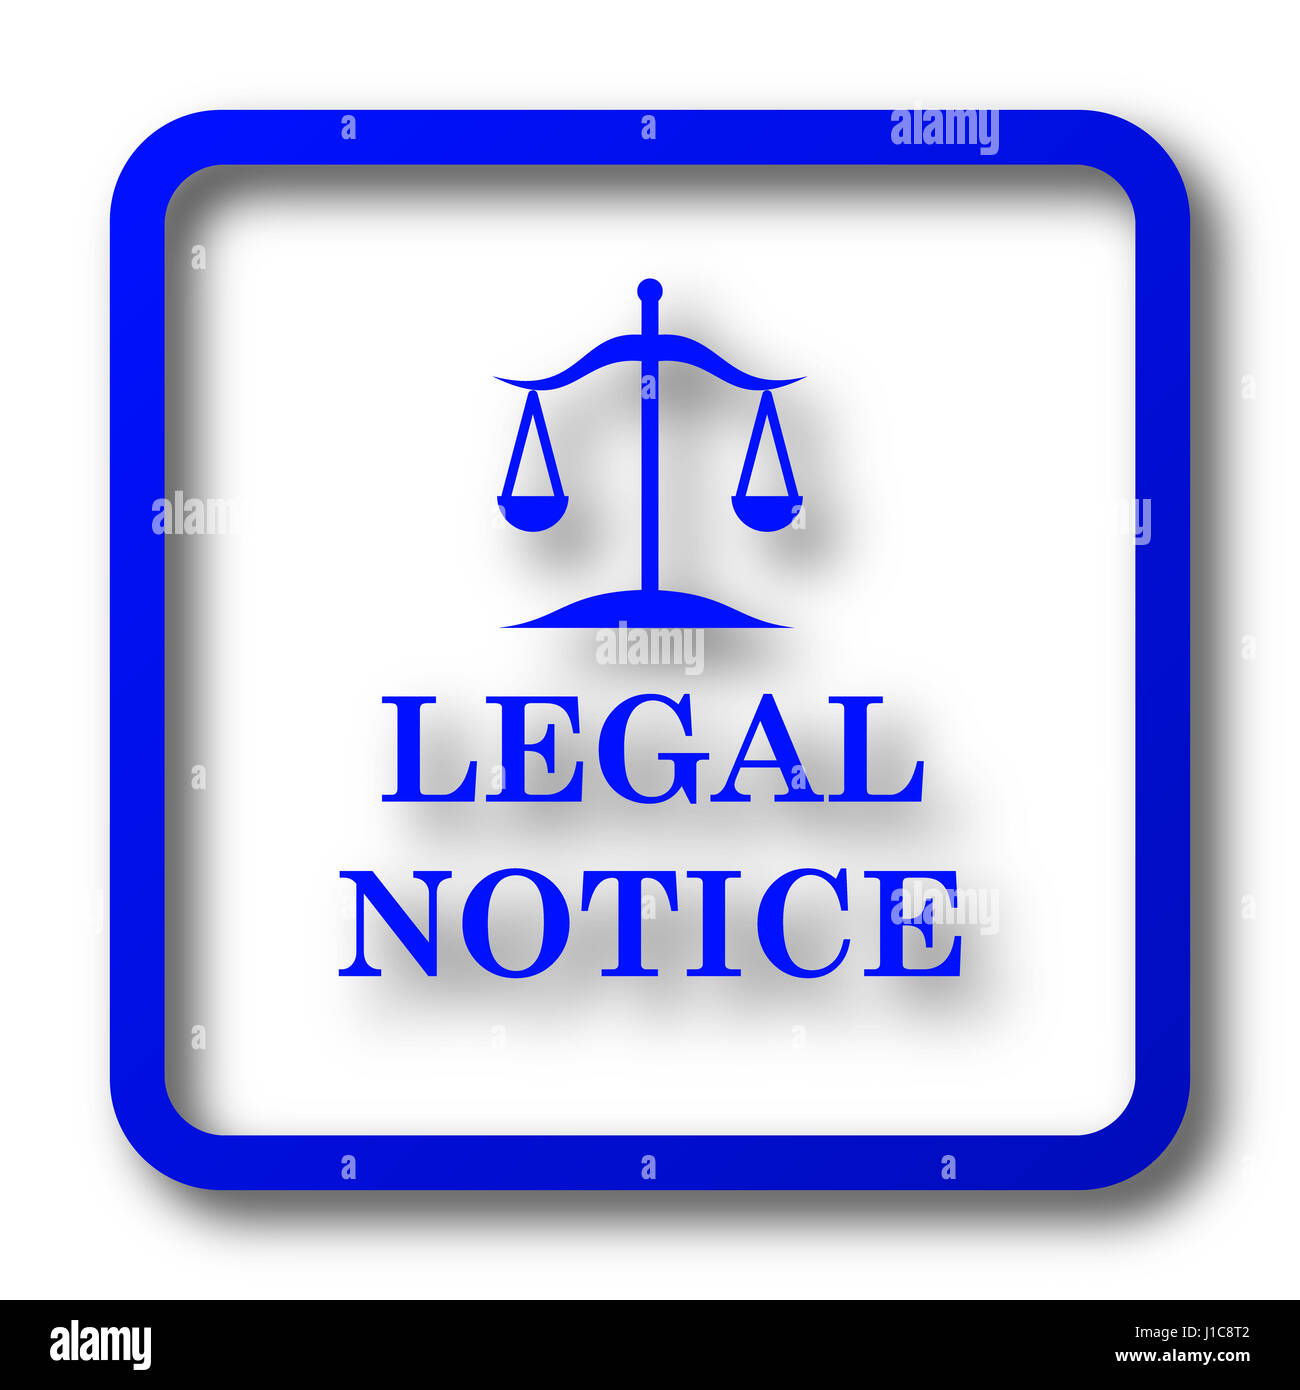 Legal notice icon. Legal notice website button on white background. Stock Photo